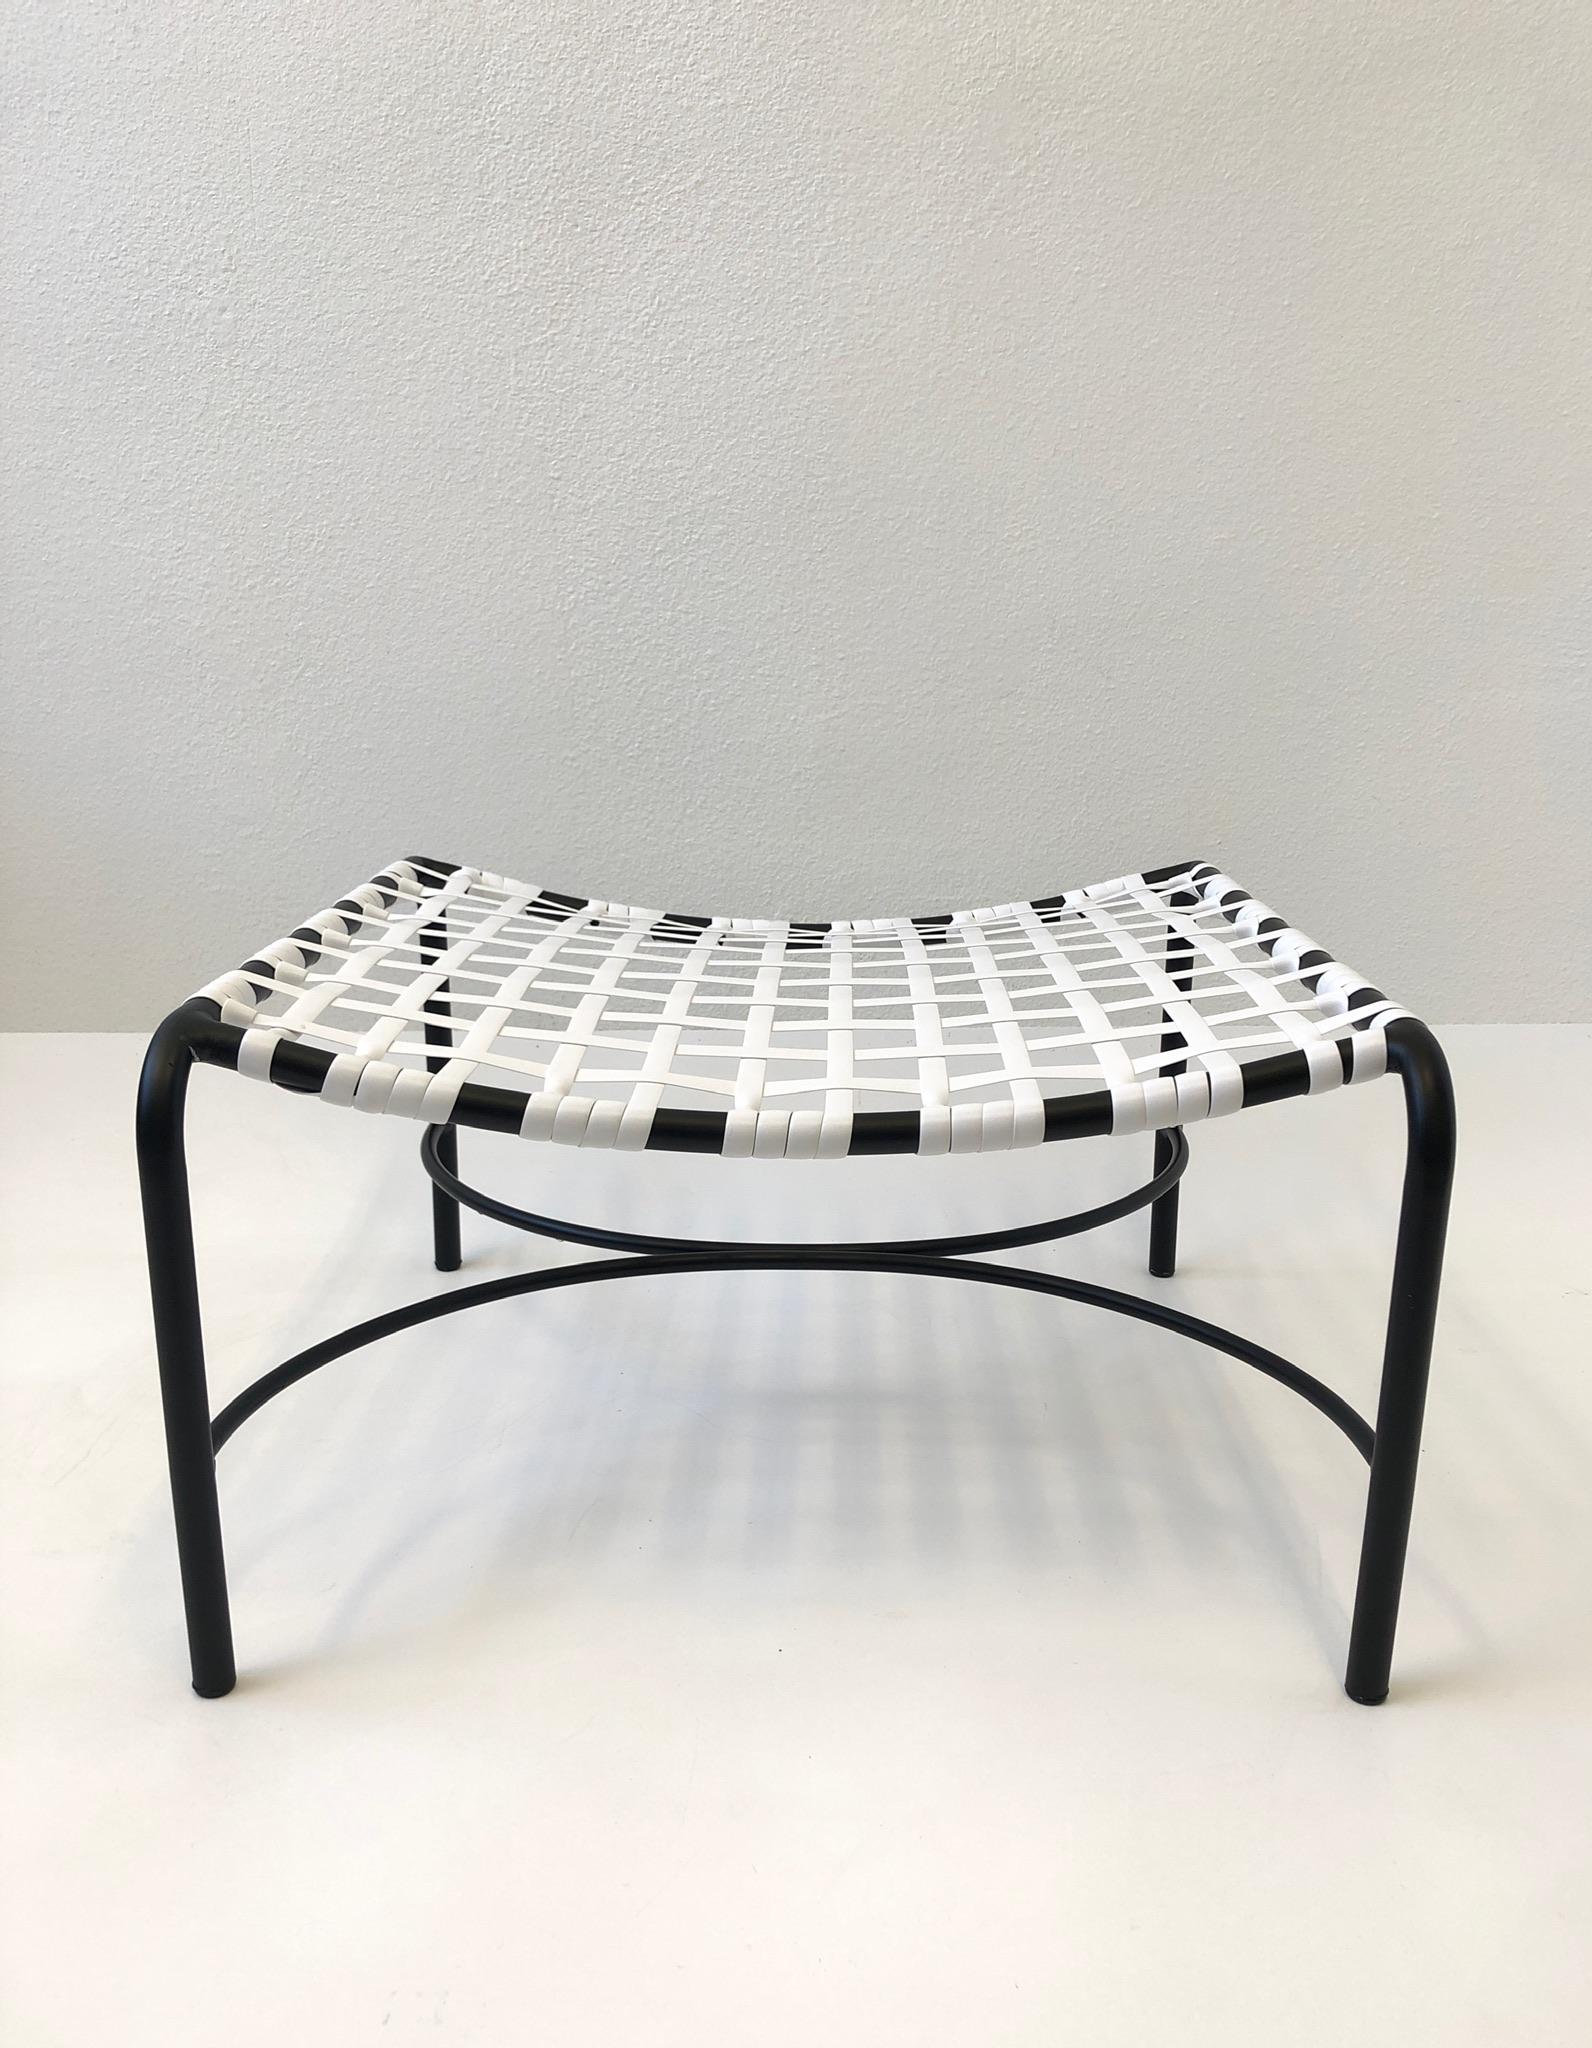 1950’s black powder coated aluminum with white vinyl straps “Katan” ottoman by Brown Jordan. 
Newly professionally restored.
Measurements: 26” wide 25.5” deep 14.75” high.